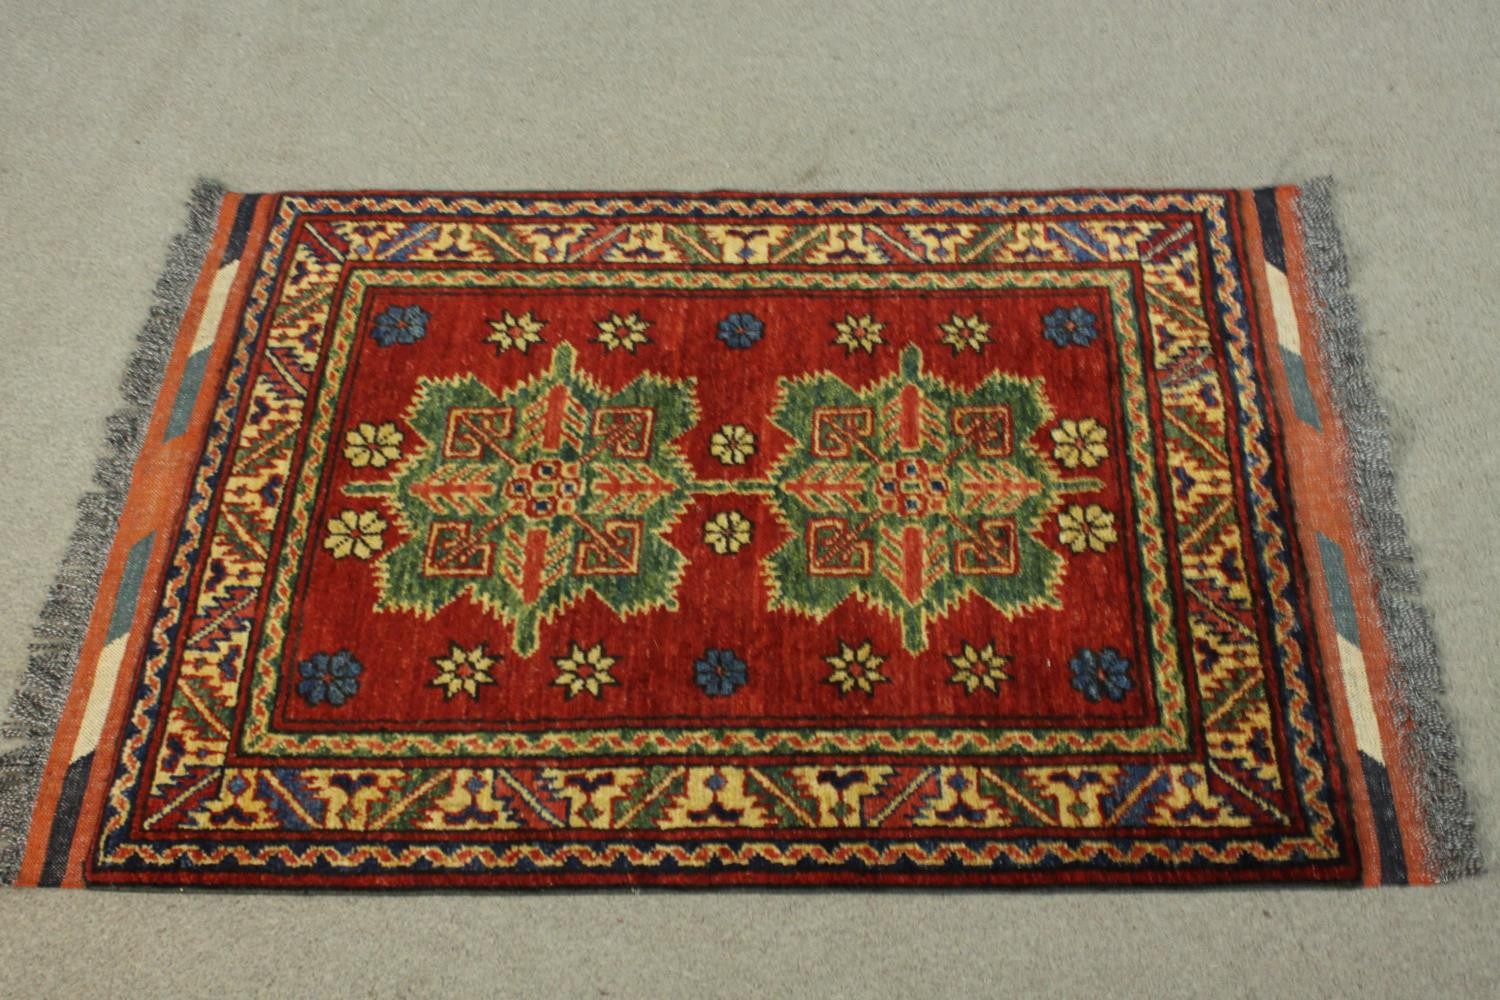 A hand made red ground Chechen rug. L.105 W.78cm.